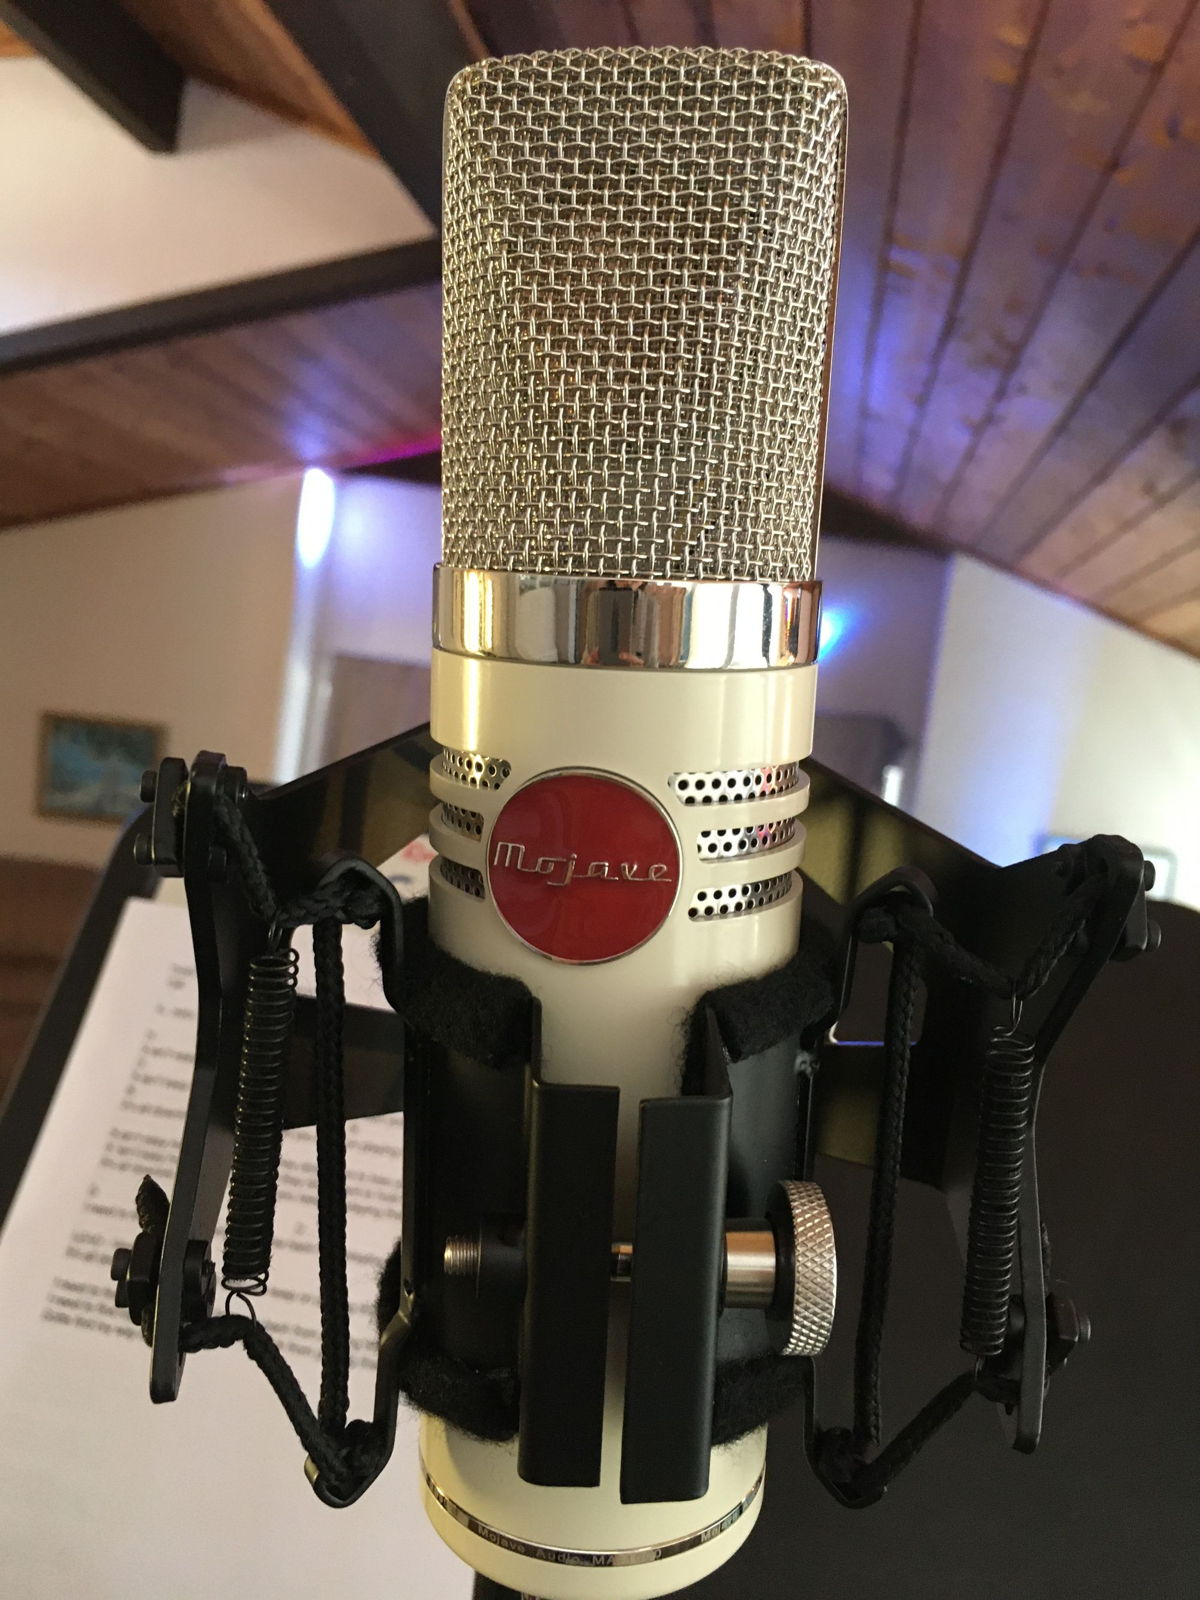 “I’ve loved Mojave microphones for a long time because of how dynamic and detailed they are, and in this case using them lets us express a lot without needing a lot of volume.” - Doug Pettibone